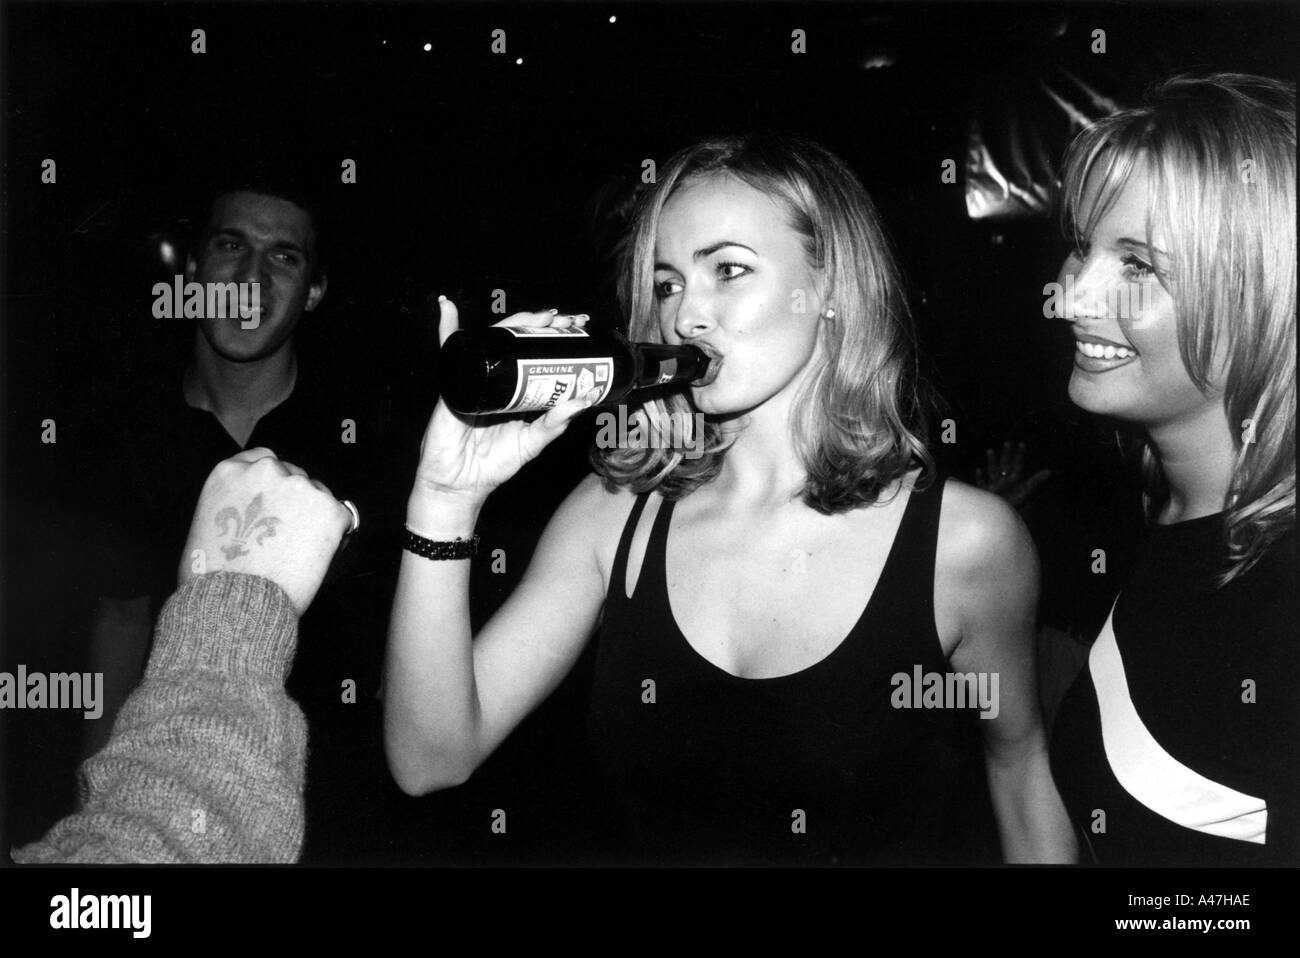 roger hutchings network photographers image ref rha 10124977 patrick cox after show party london fashion week 1997 Stock Photo